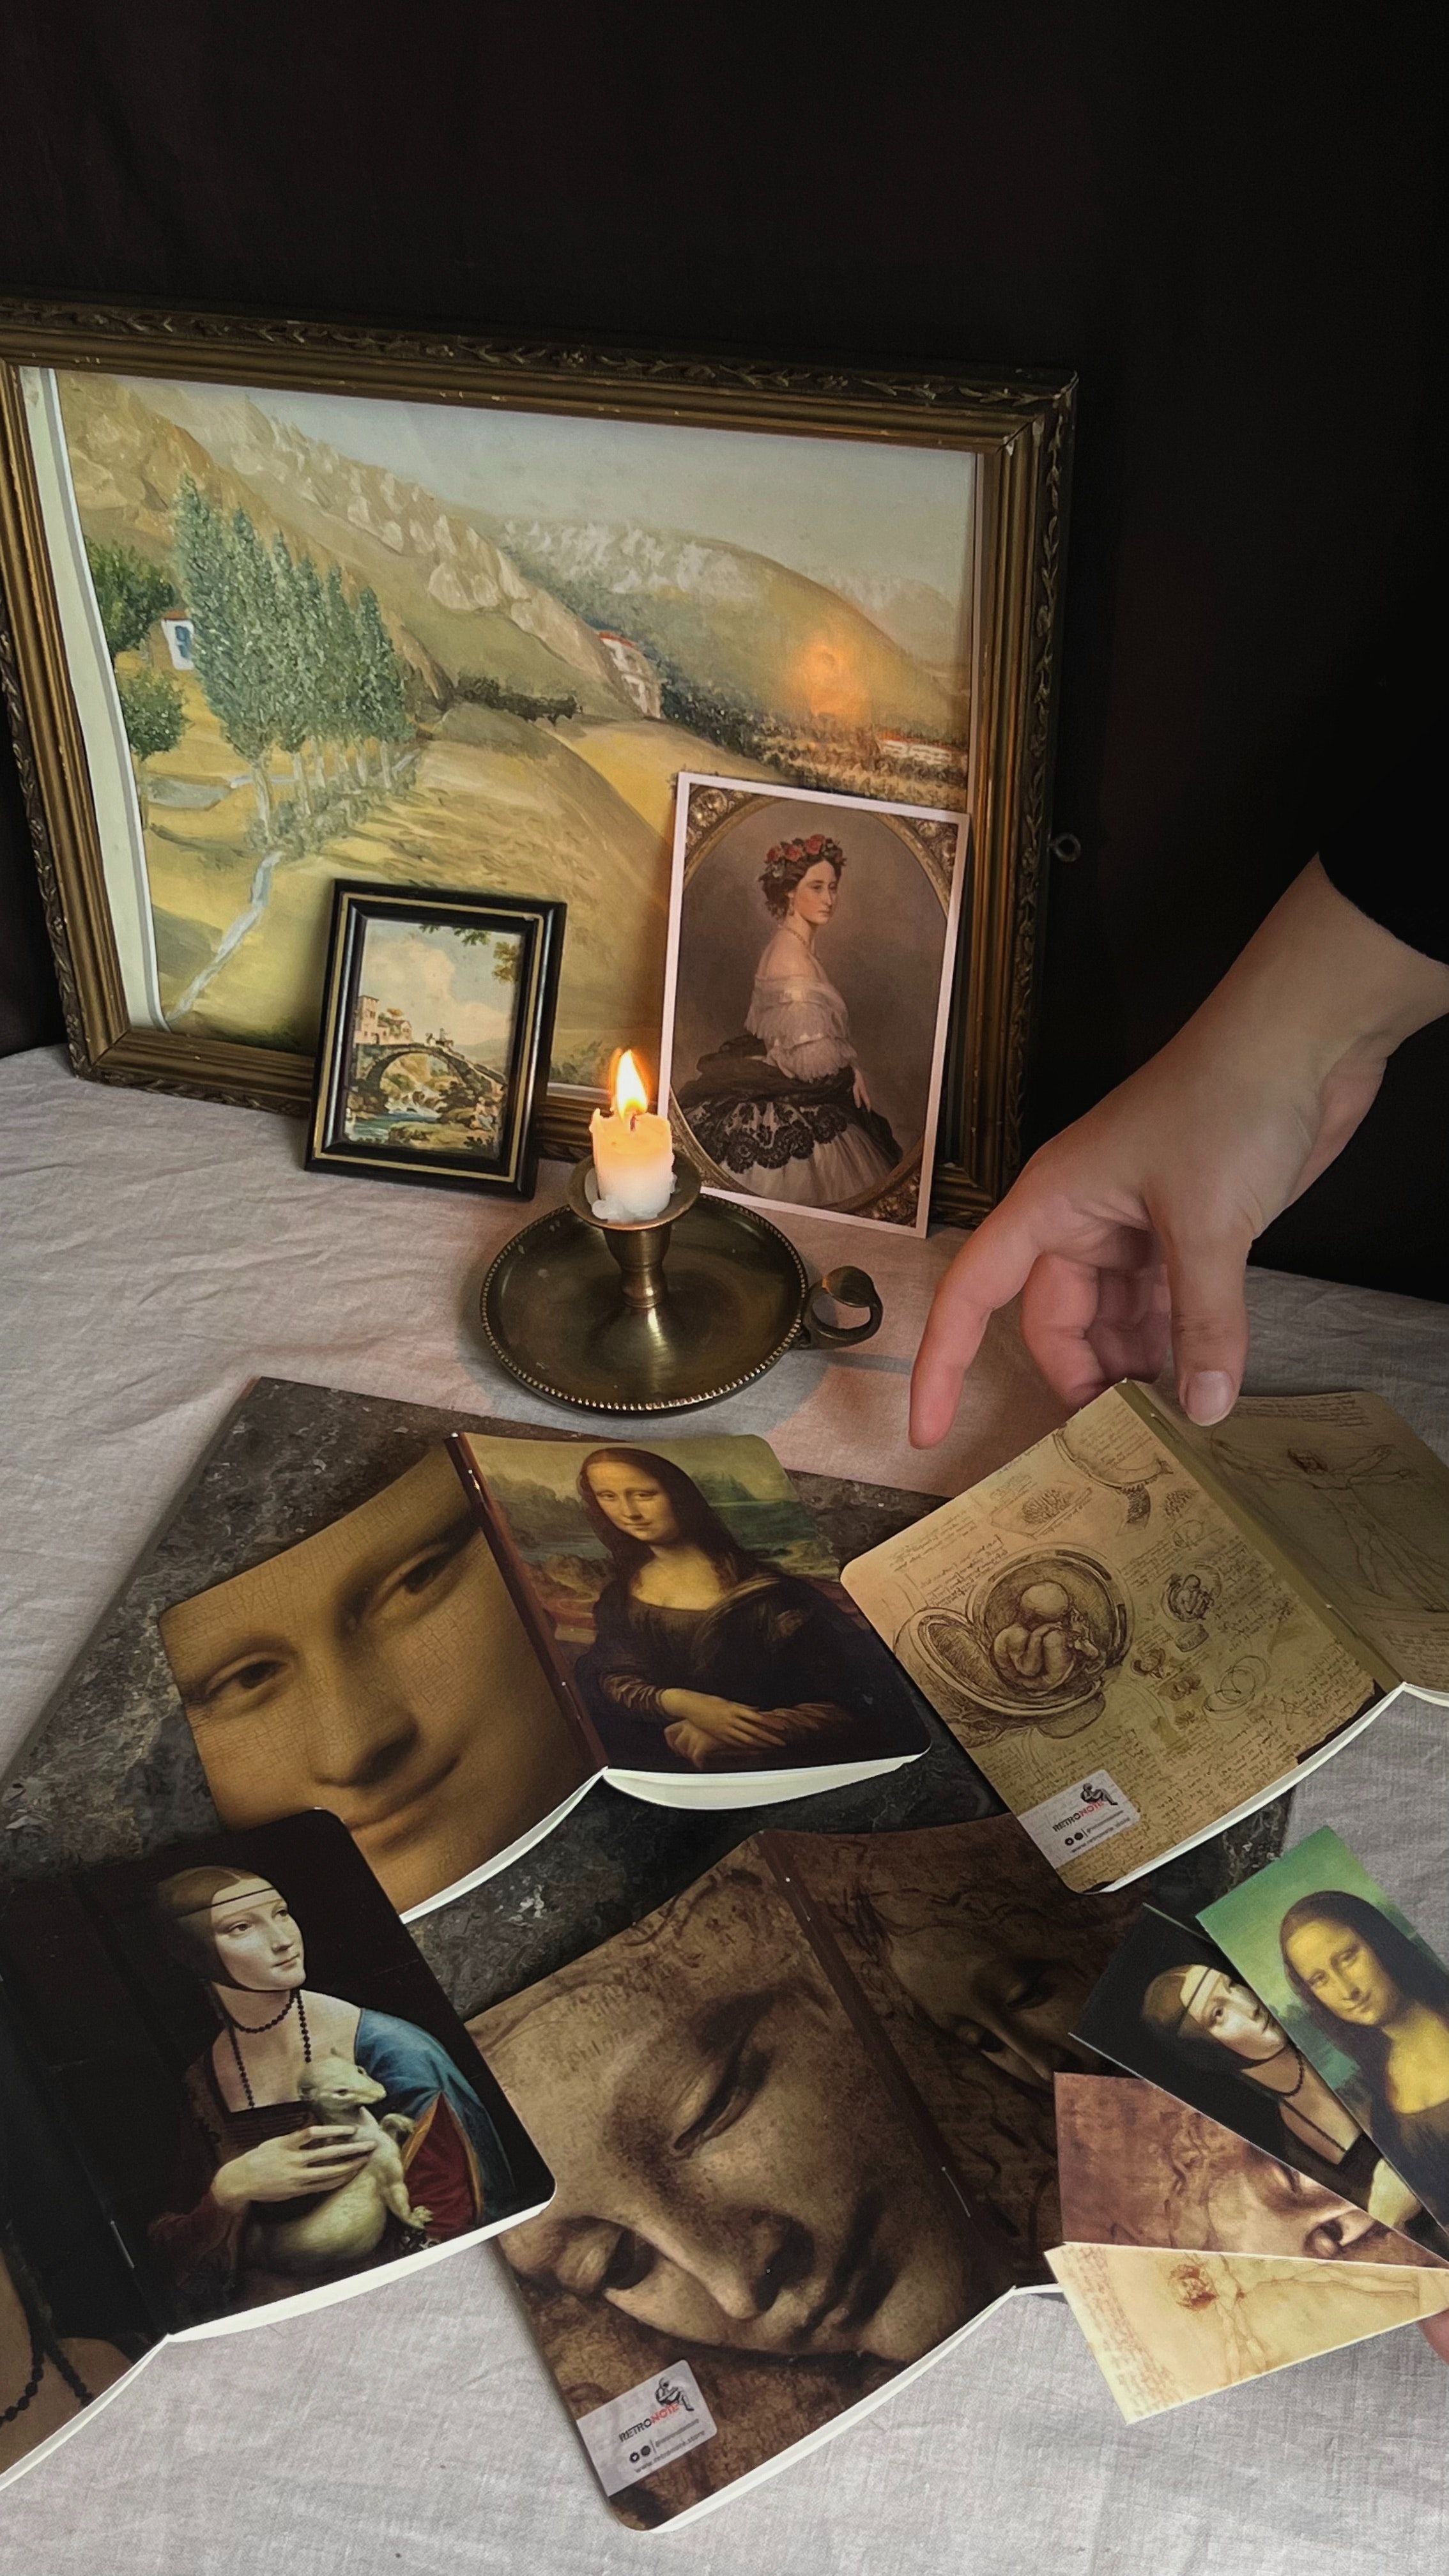 A person's hand reaches for a postcard of the Mona Lisa in front of a candle and a framed print of the painting. - Mona Lisa